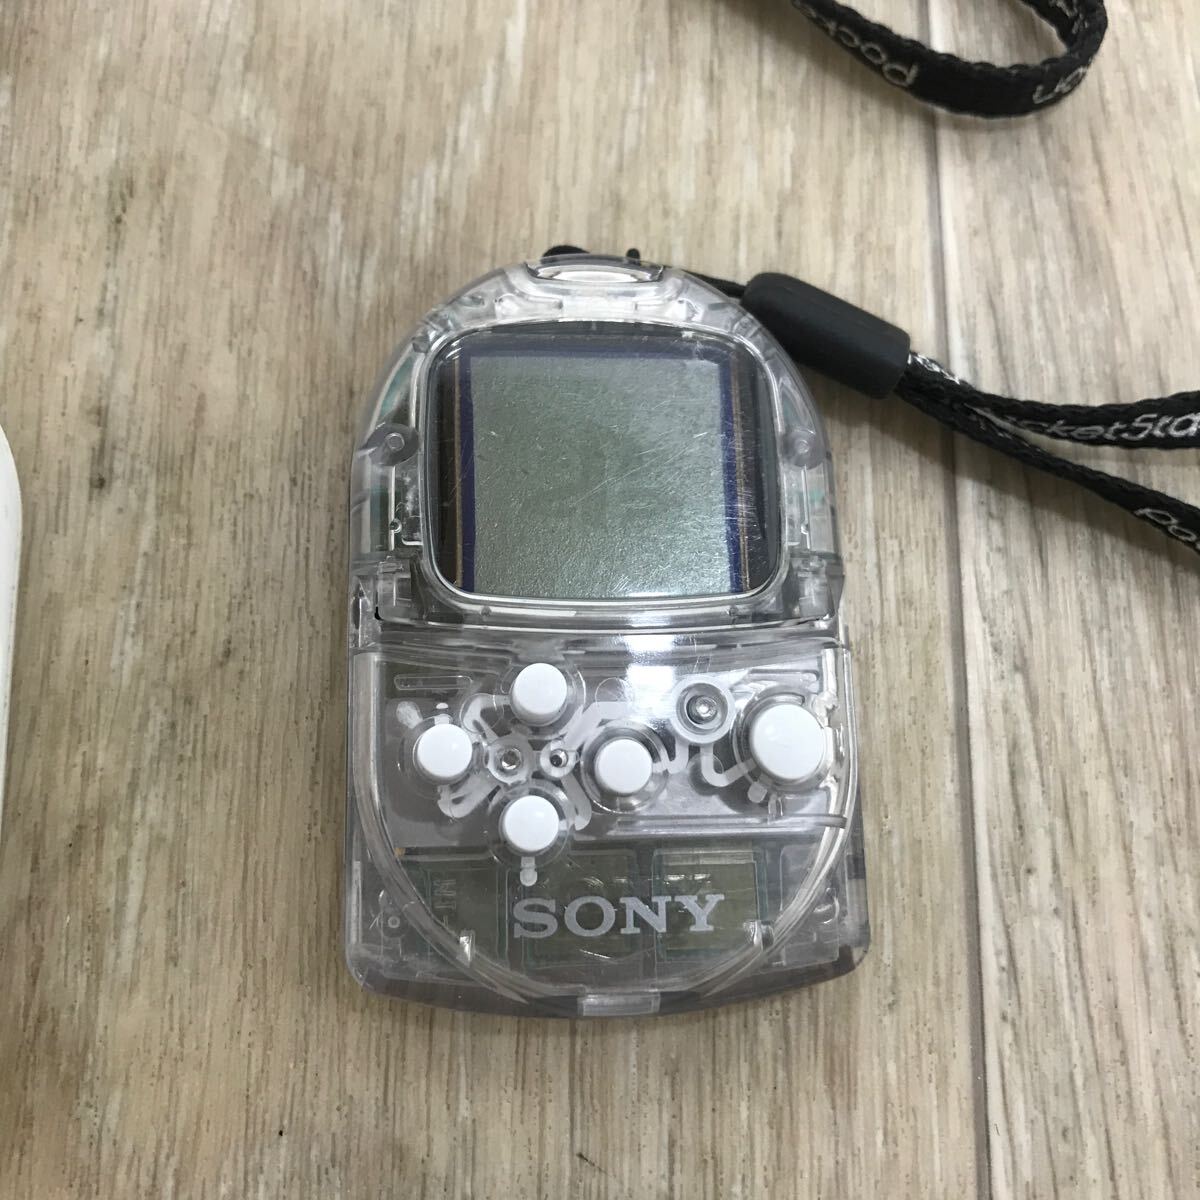 063 A / PS PocketStation SCPH-4000 / 4 piece set white clear SONY Sony used Junk 